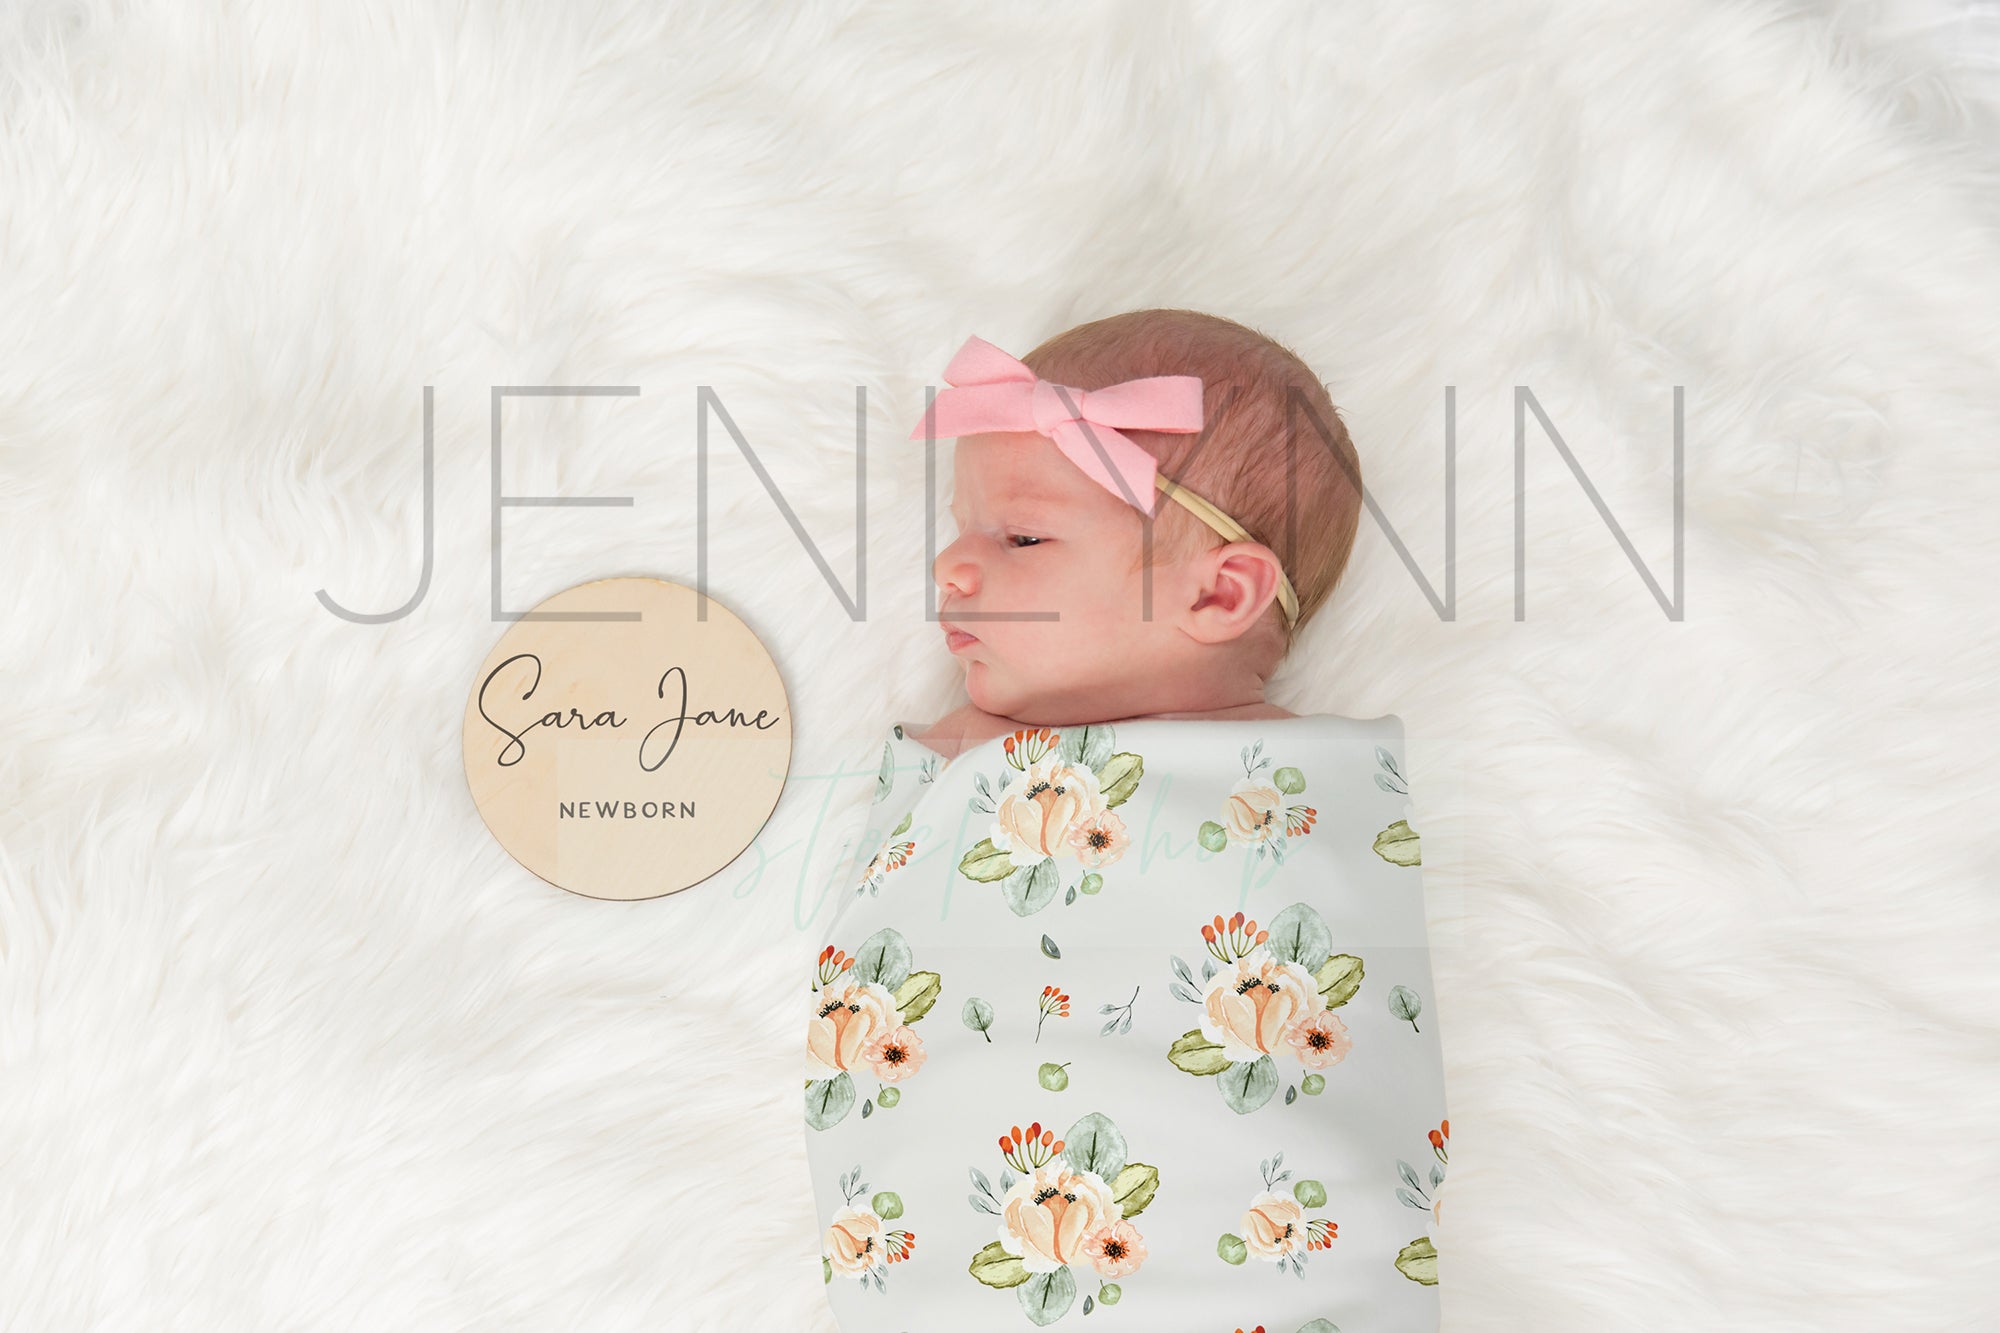 Jersey Baby Blanket Mockup with Wooden Stats sign #4 PSD